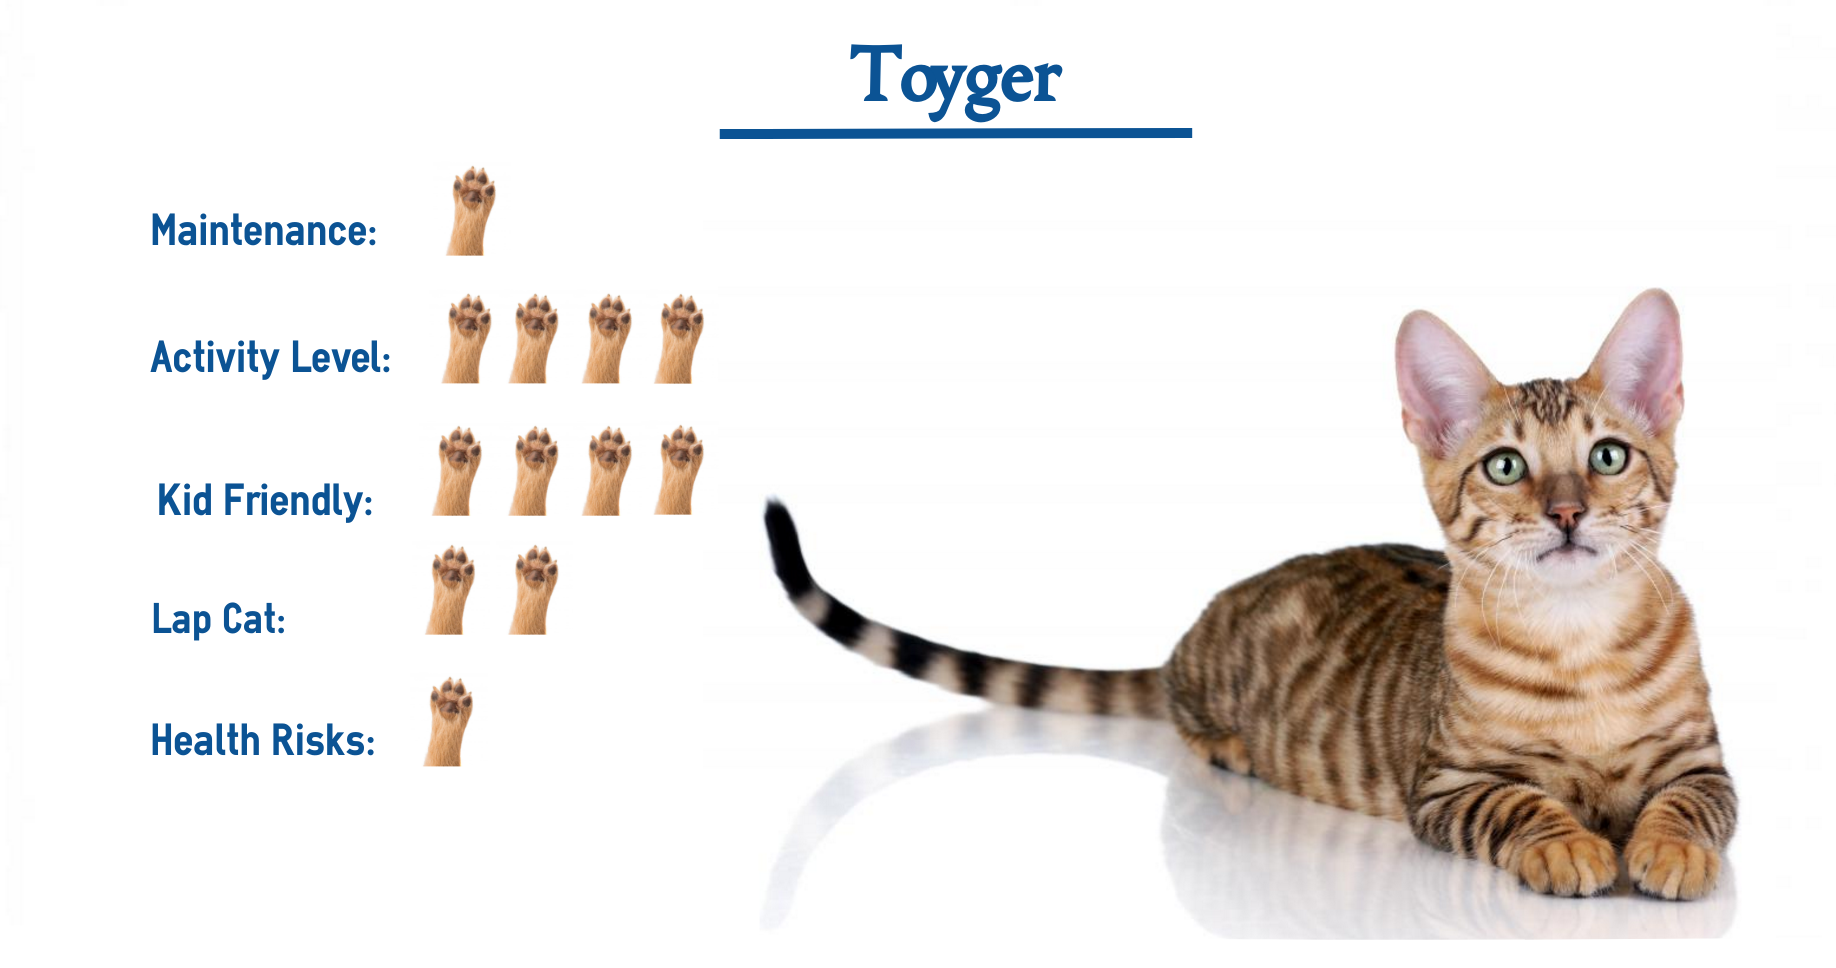 Toyger Cat Breed Everything You Need To Know At A Glance